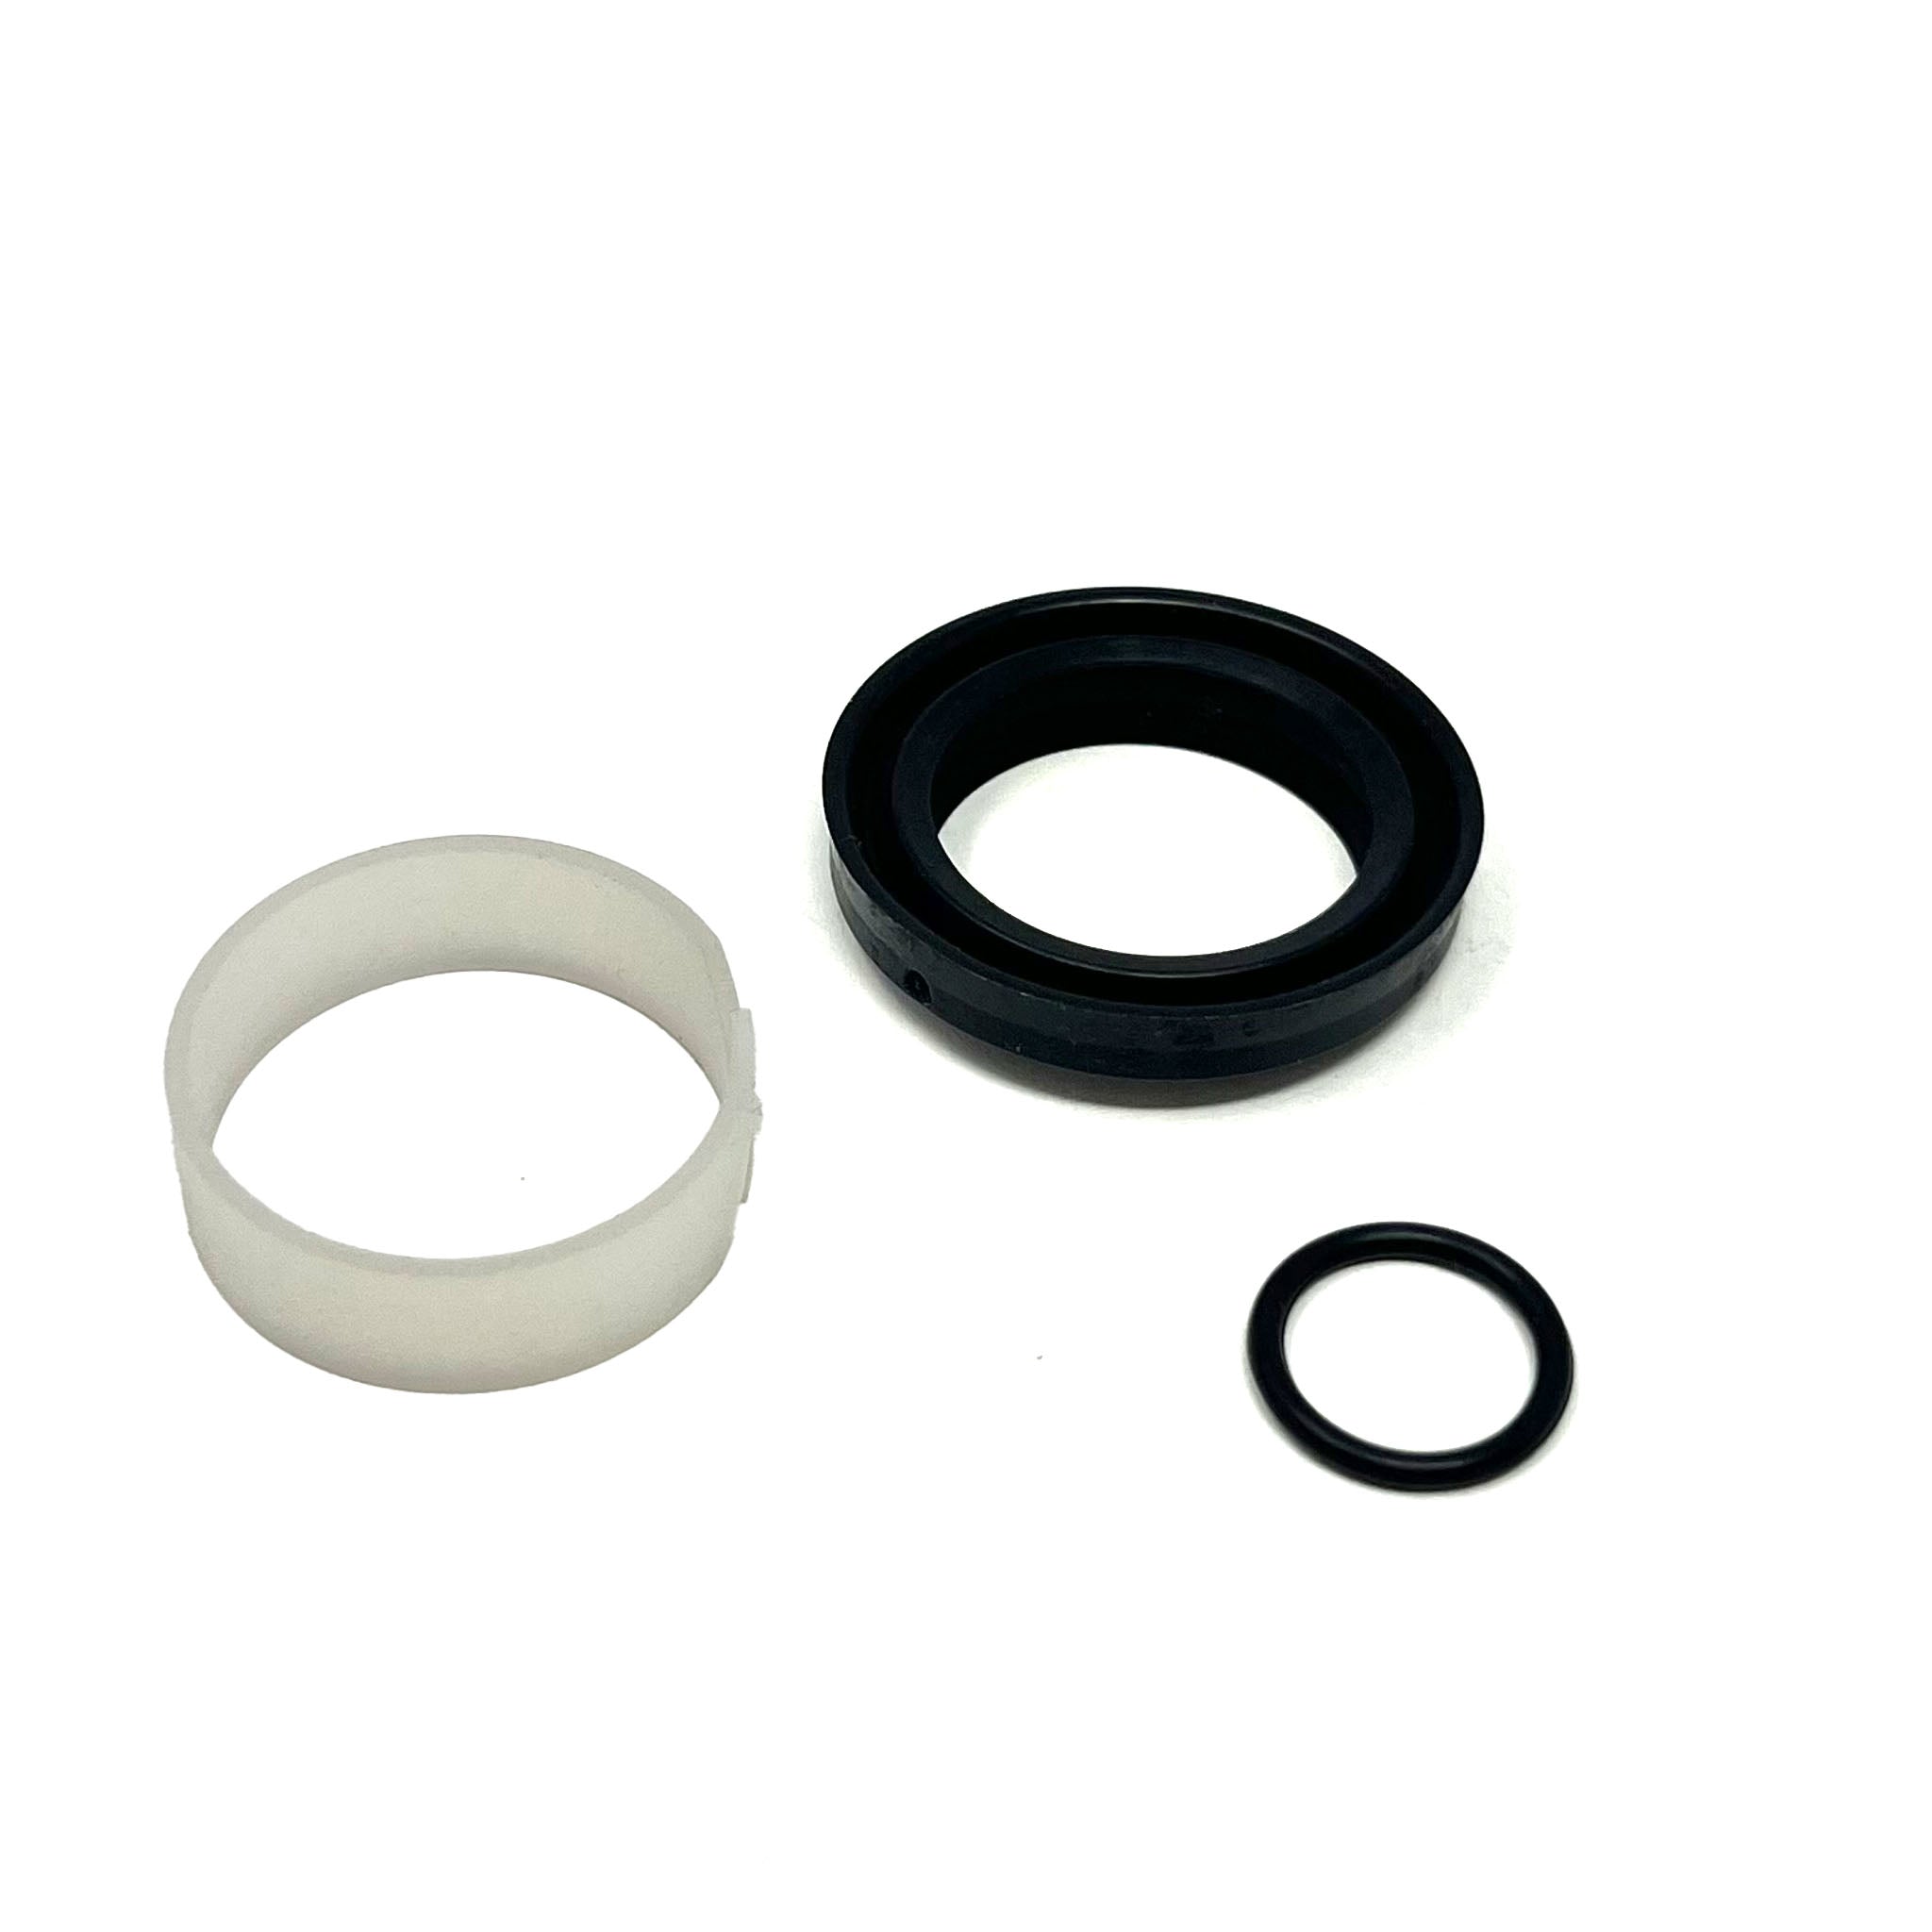 Table Top Cylinder Seal Kit for Coats 5030, 5060 or 5070